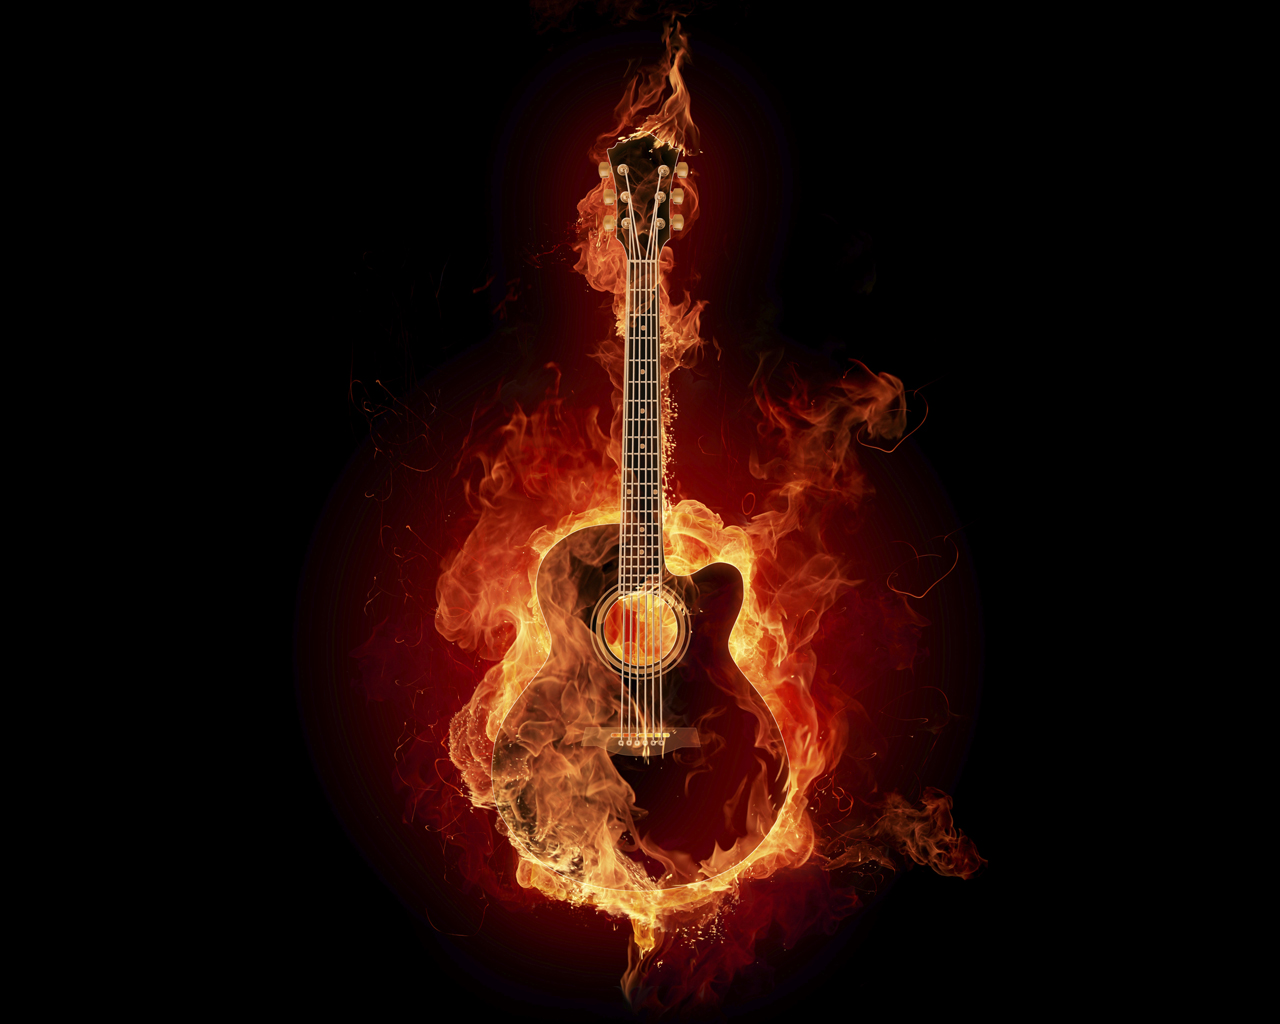 ... /Funny_wallpapers_Creative_Wallpaper_Guitar_is_on_fire_013663_.jpg